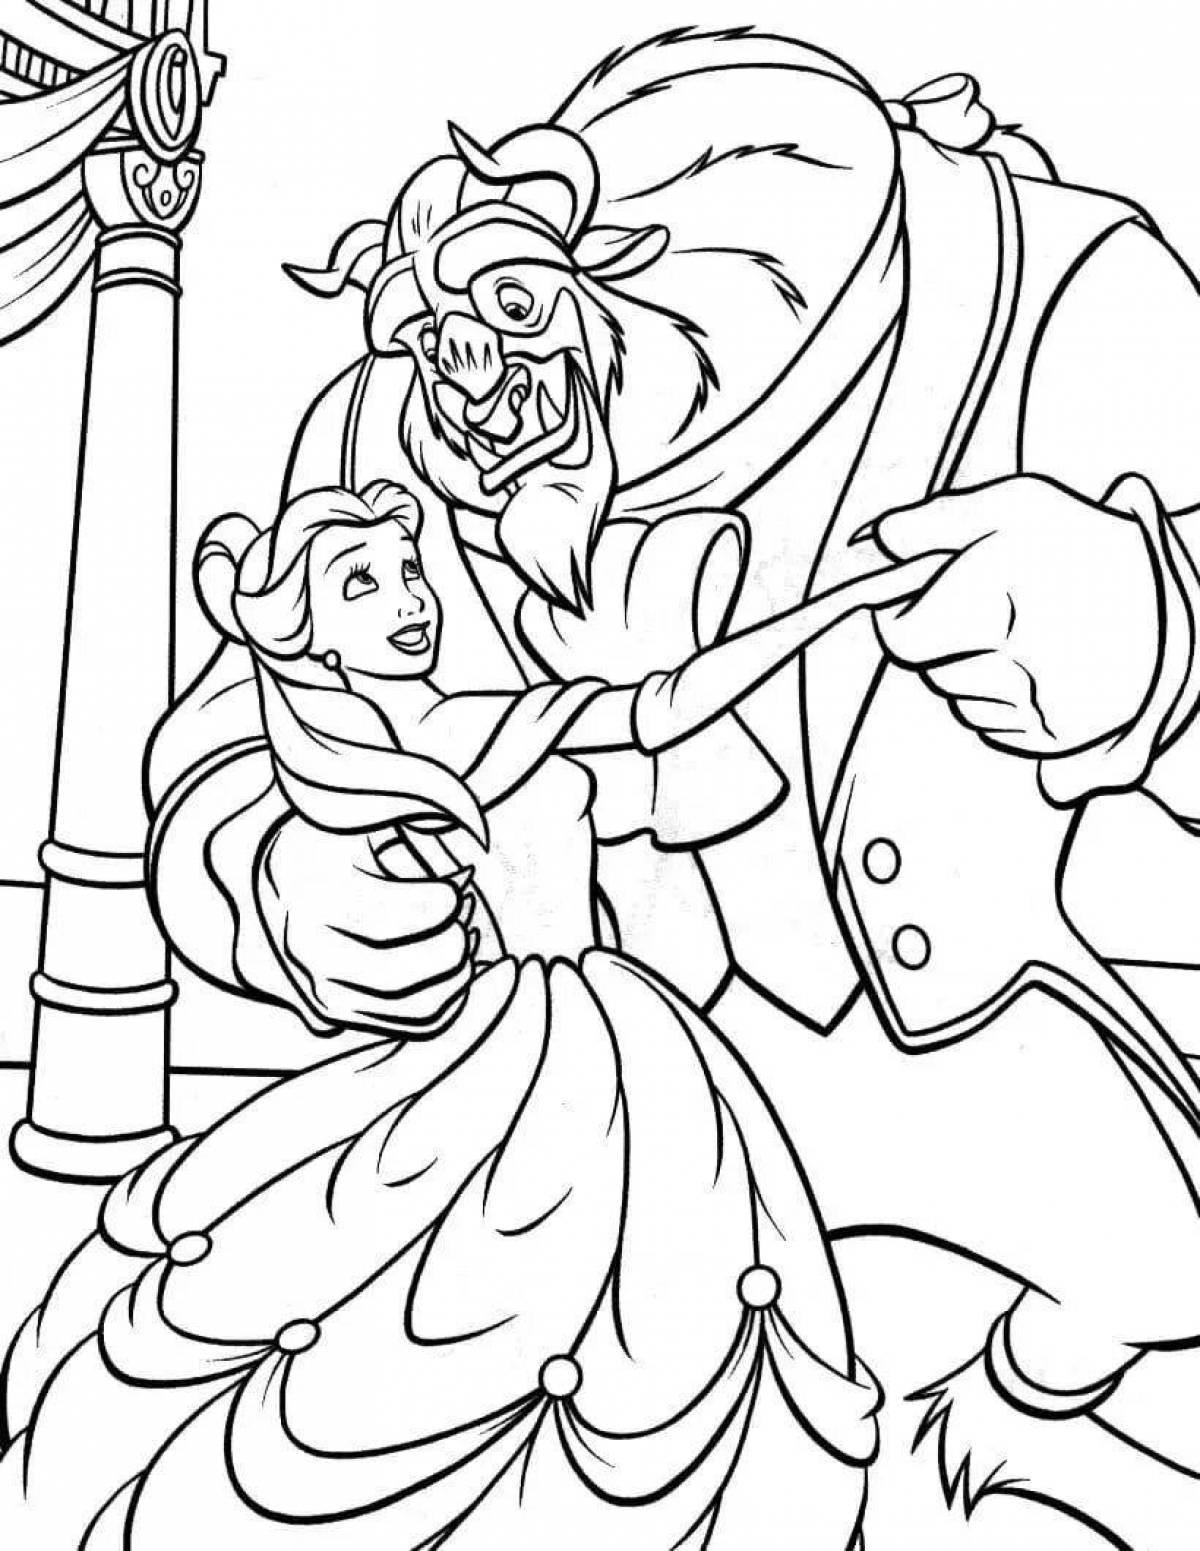 Bright belle and monster coloring page